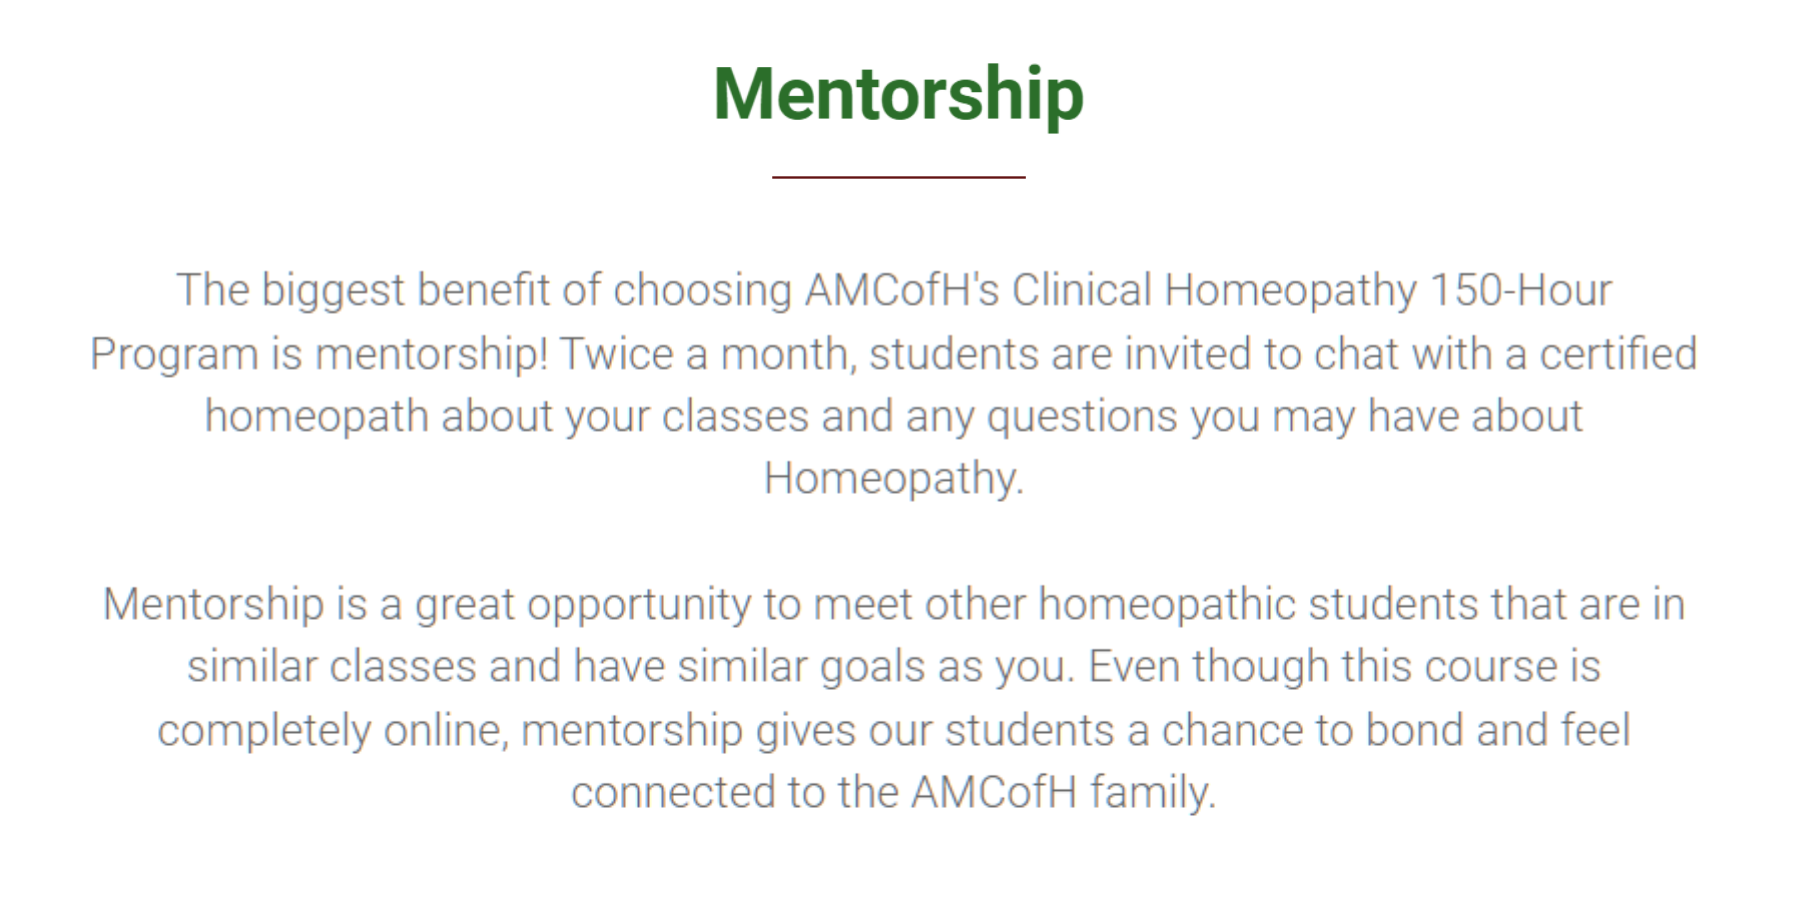 Mentorship is the biggest benefit of choosing AMCofH's Clinical Homeopathy 150-Hour Program is mentorship! Twice a month, students are invited to chat with a certified homeopath about your classes and any questions.